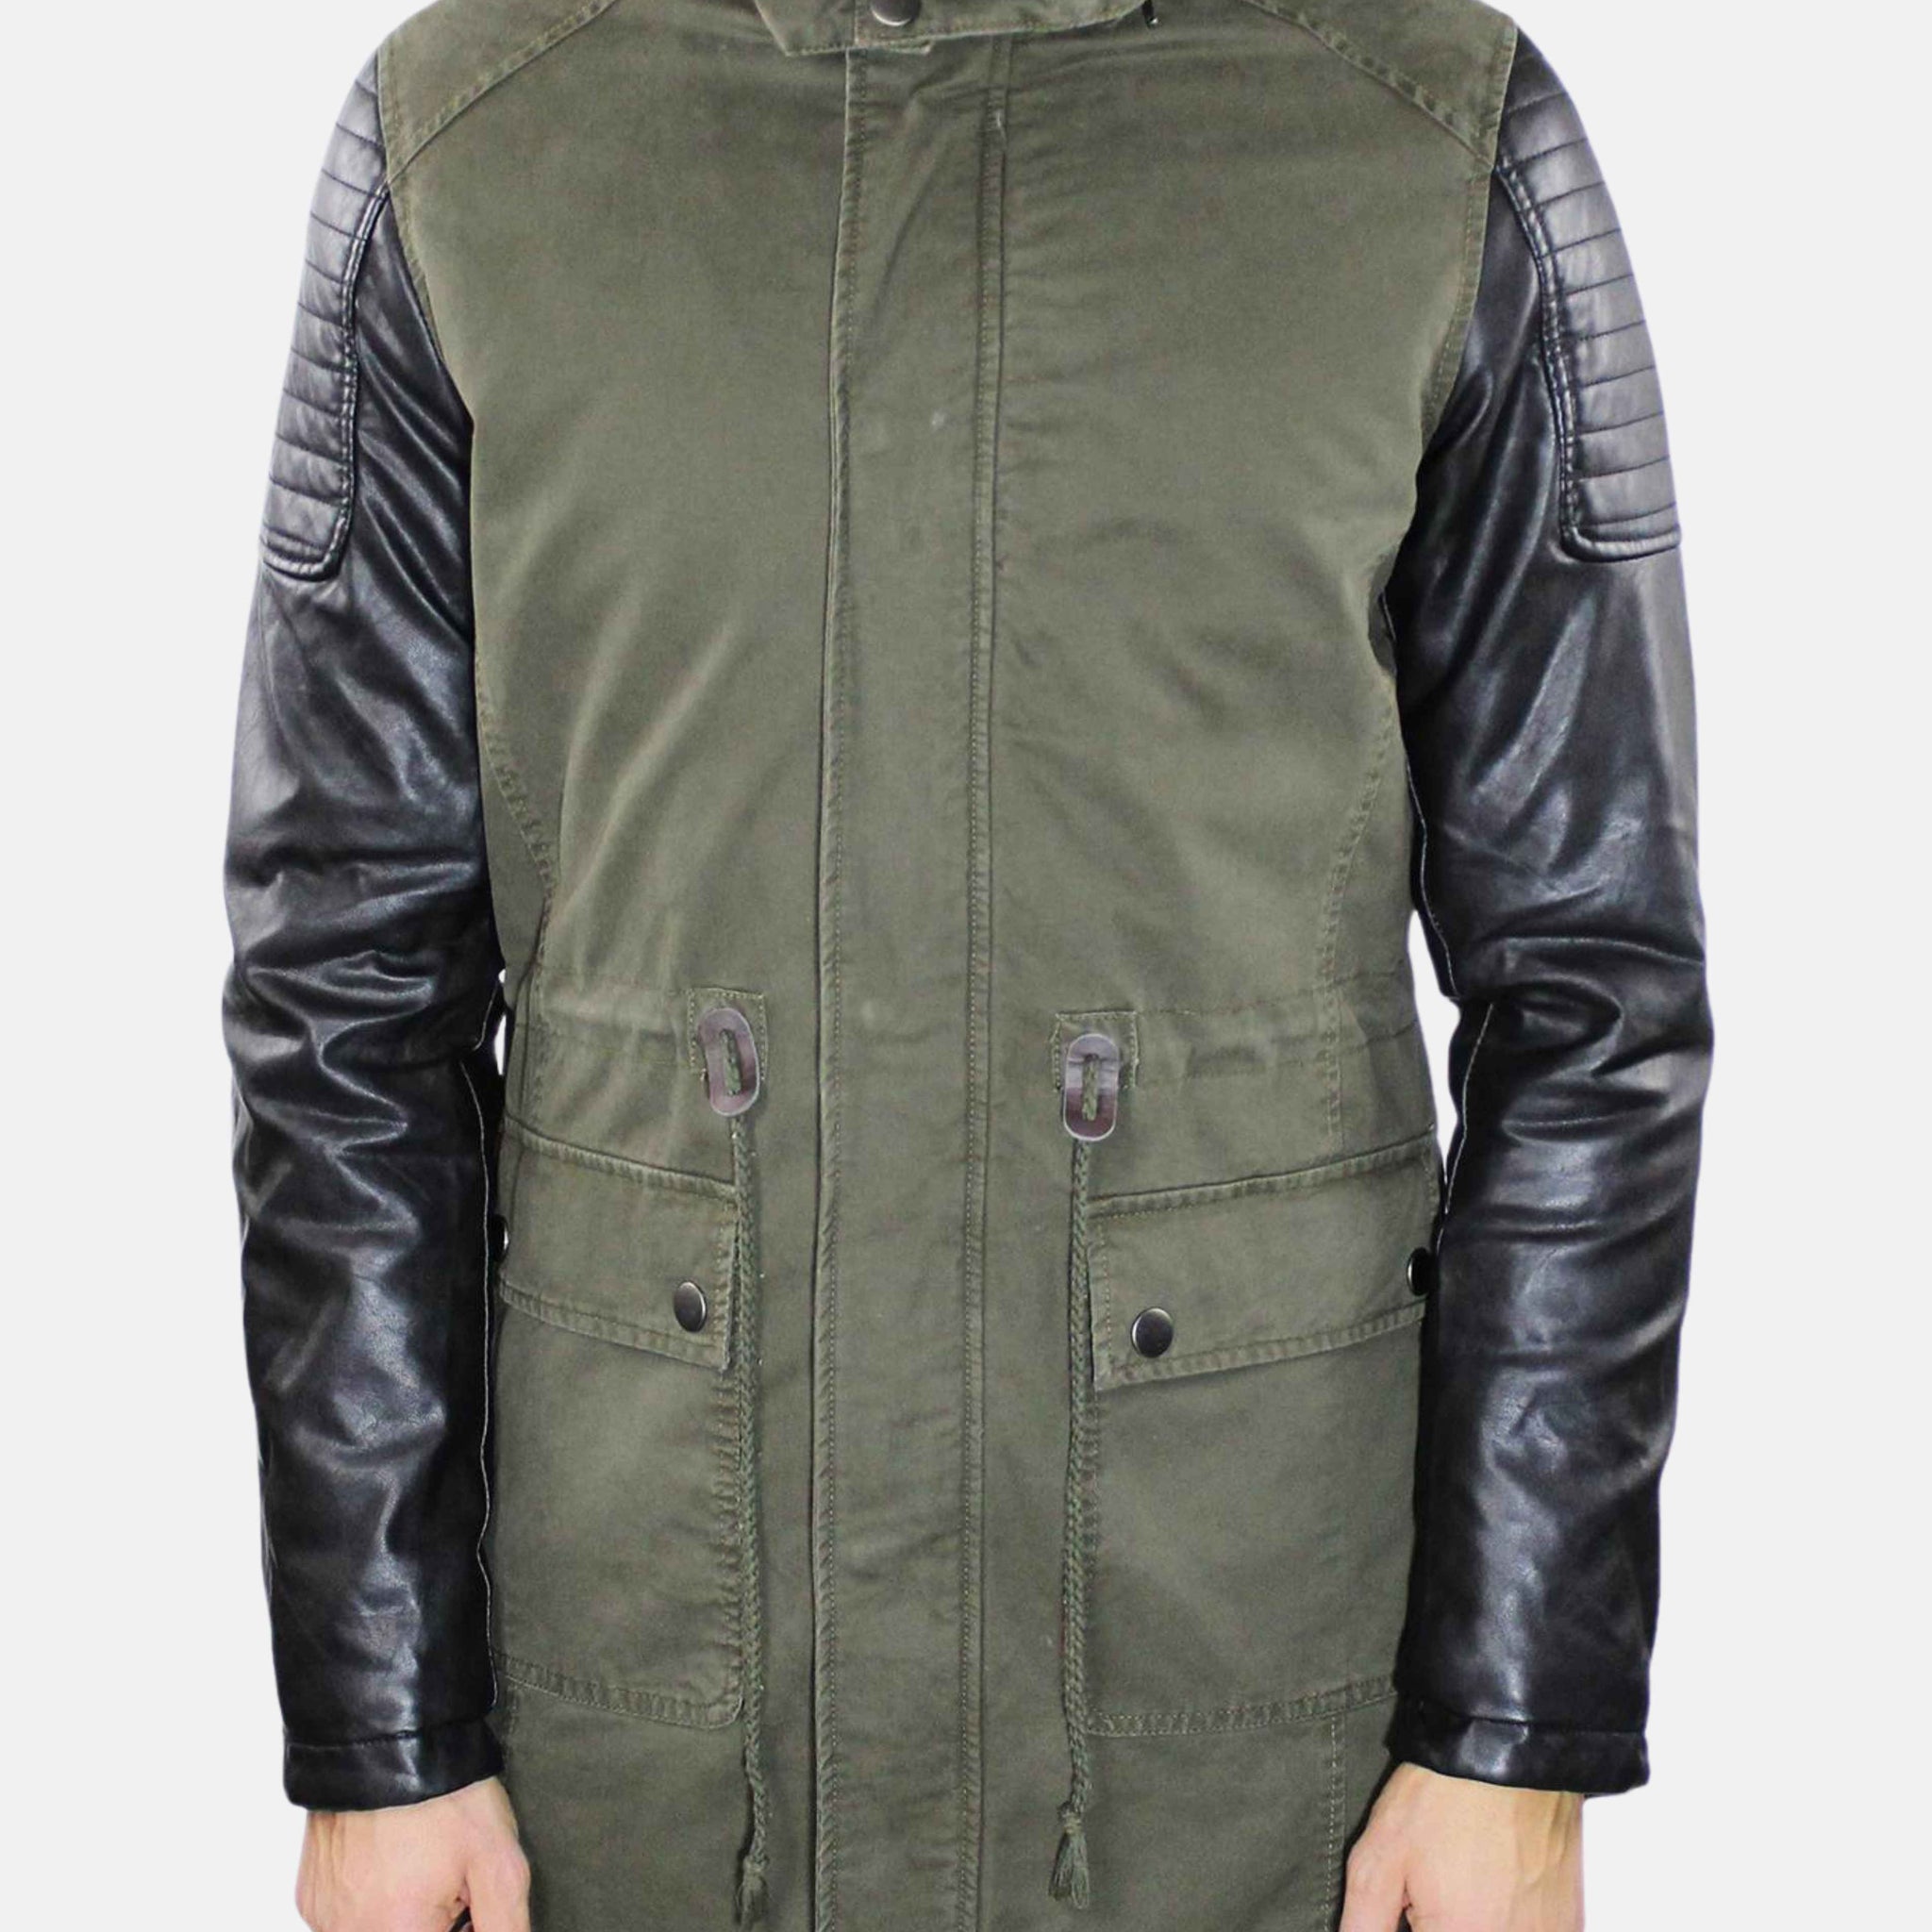 Green parka with leather sleeves